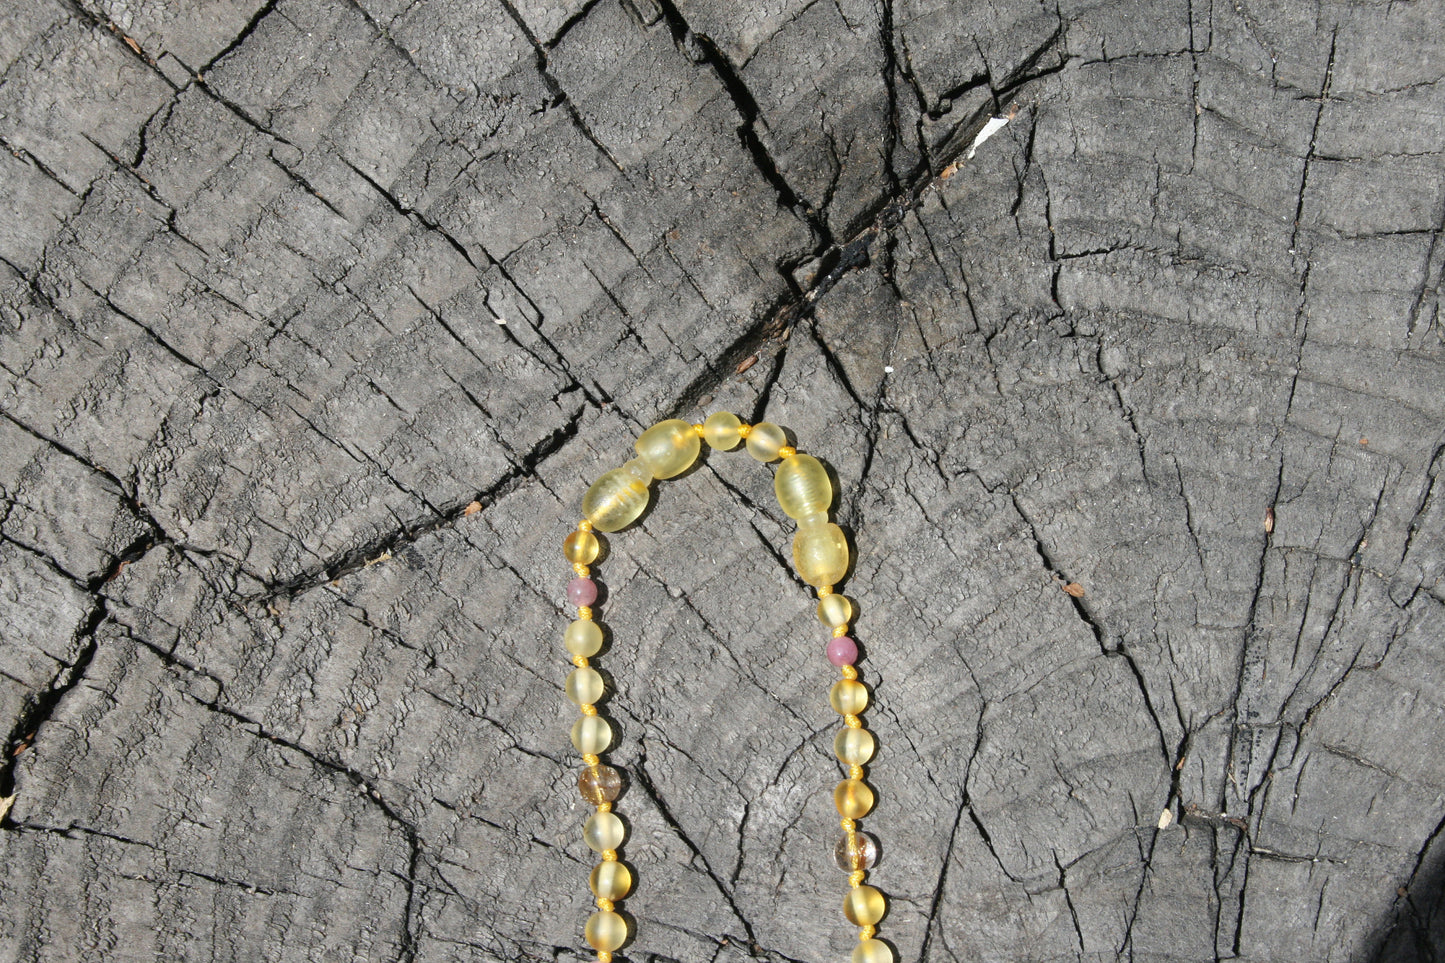 Picture 6 is a lemon extender in use. (jewelry on wooden background)